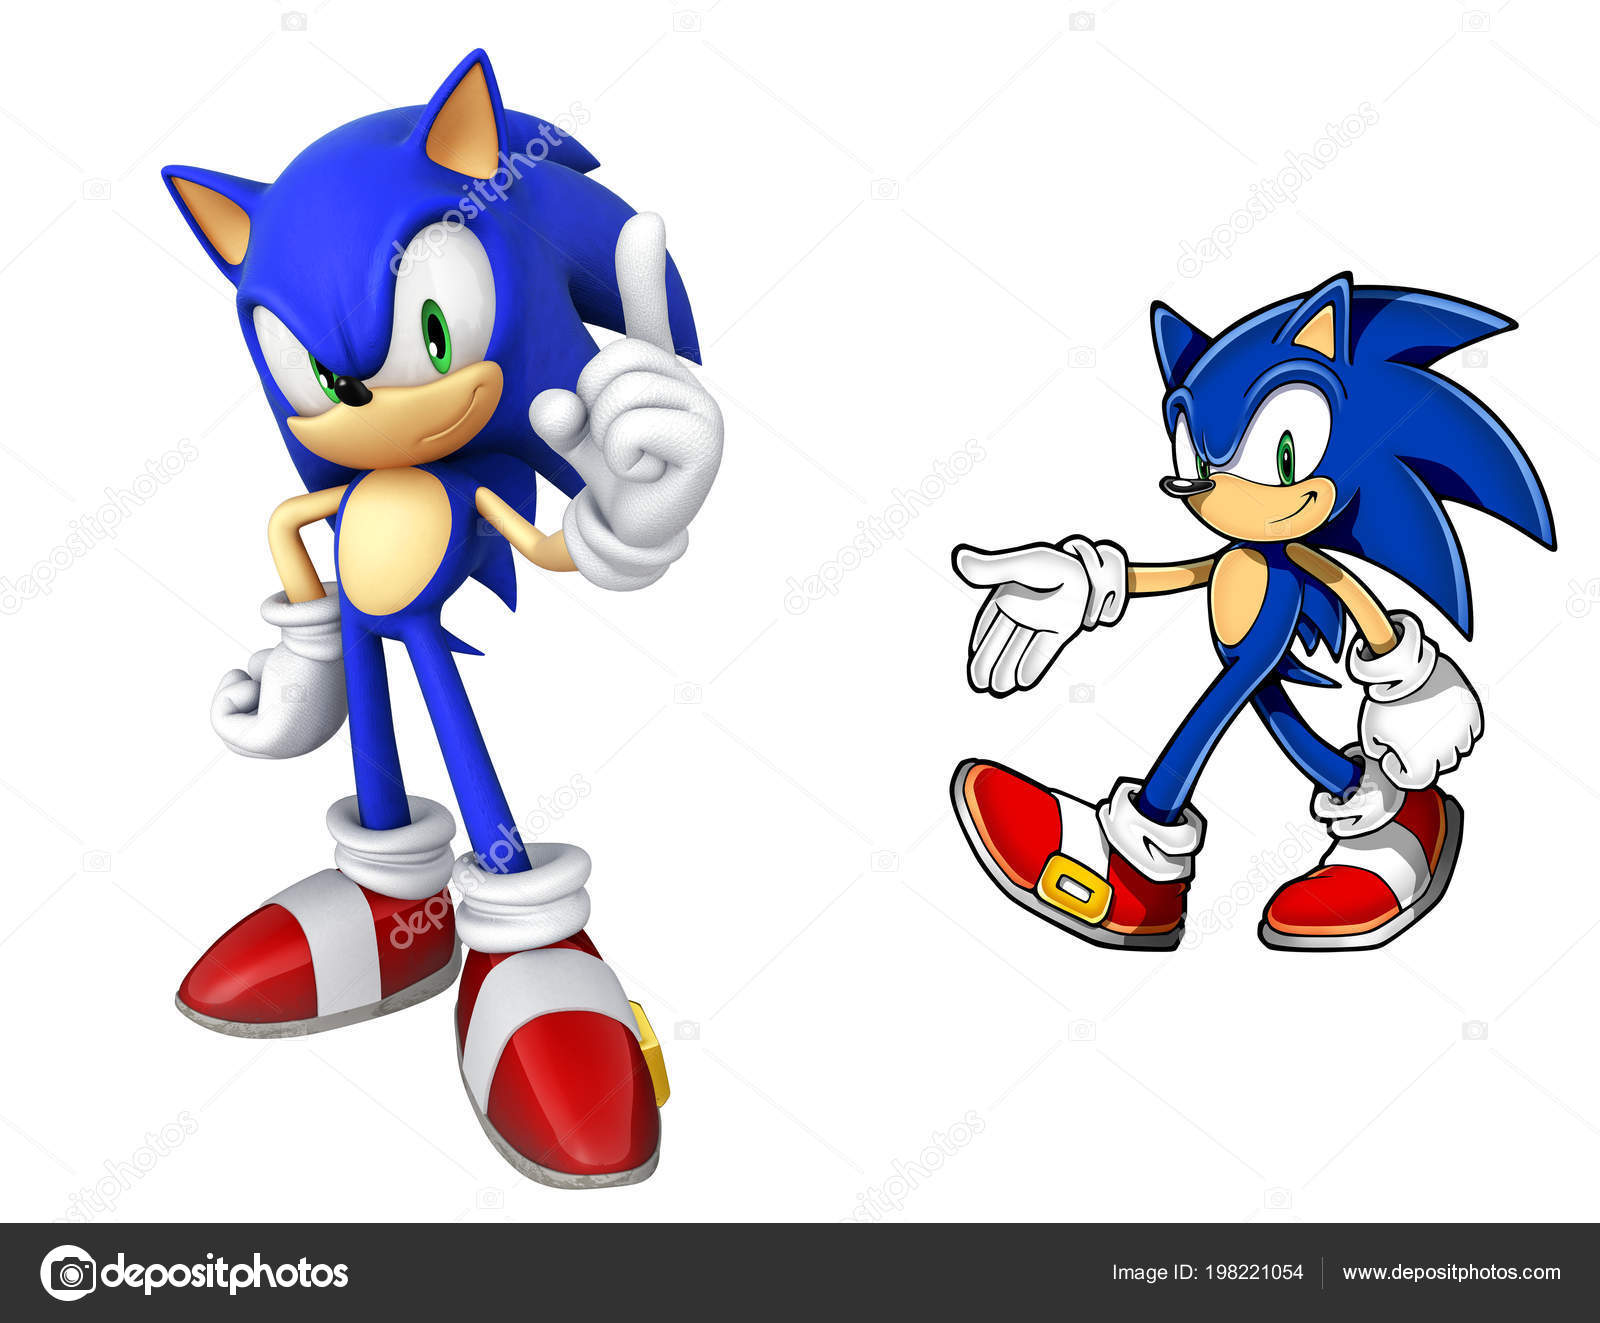 8. Sonic the Hedgehog: Pronouns and Representation in Video Games - wide 1